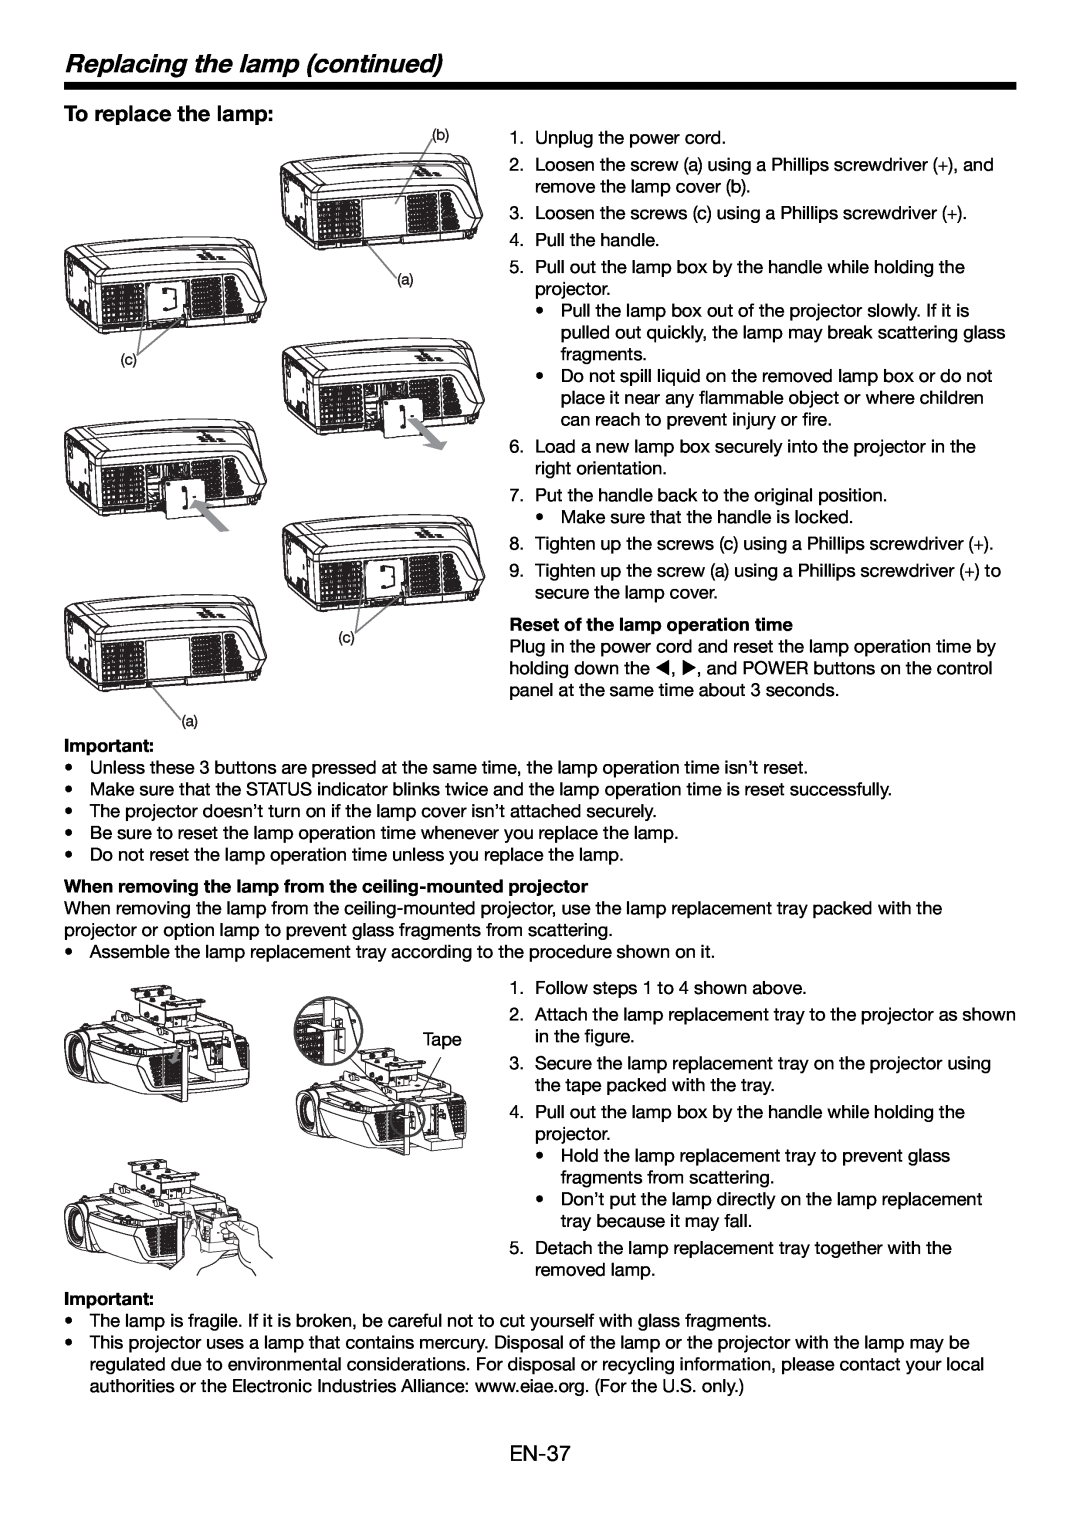 Mitsubishi Electronics HC6000 user manual Replacing the lamp continued, To replace the lamp, fragments 